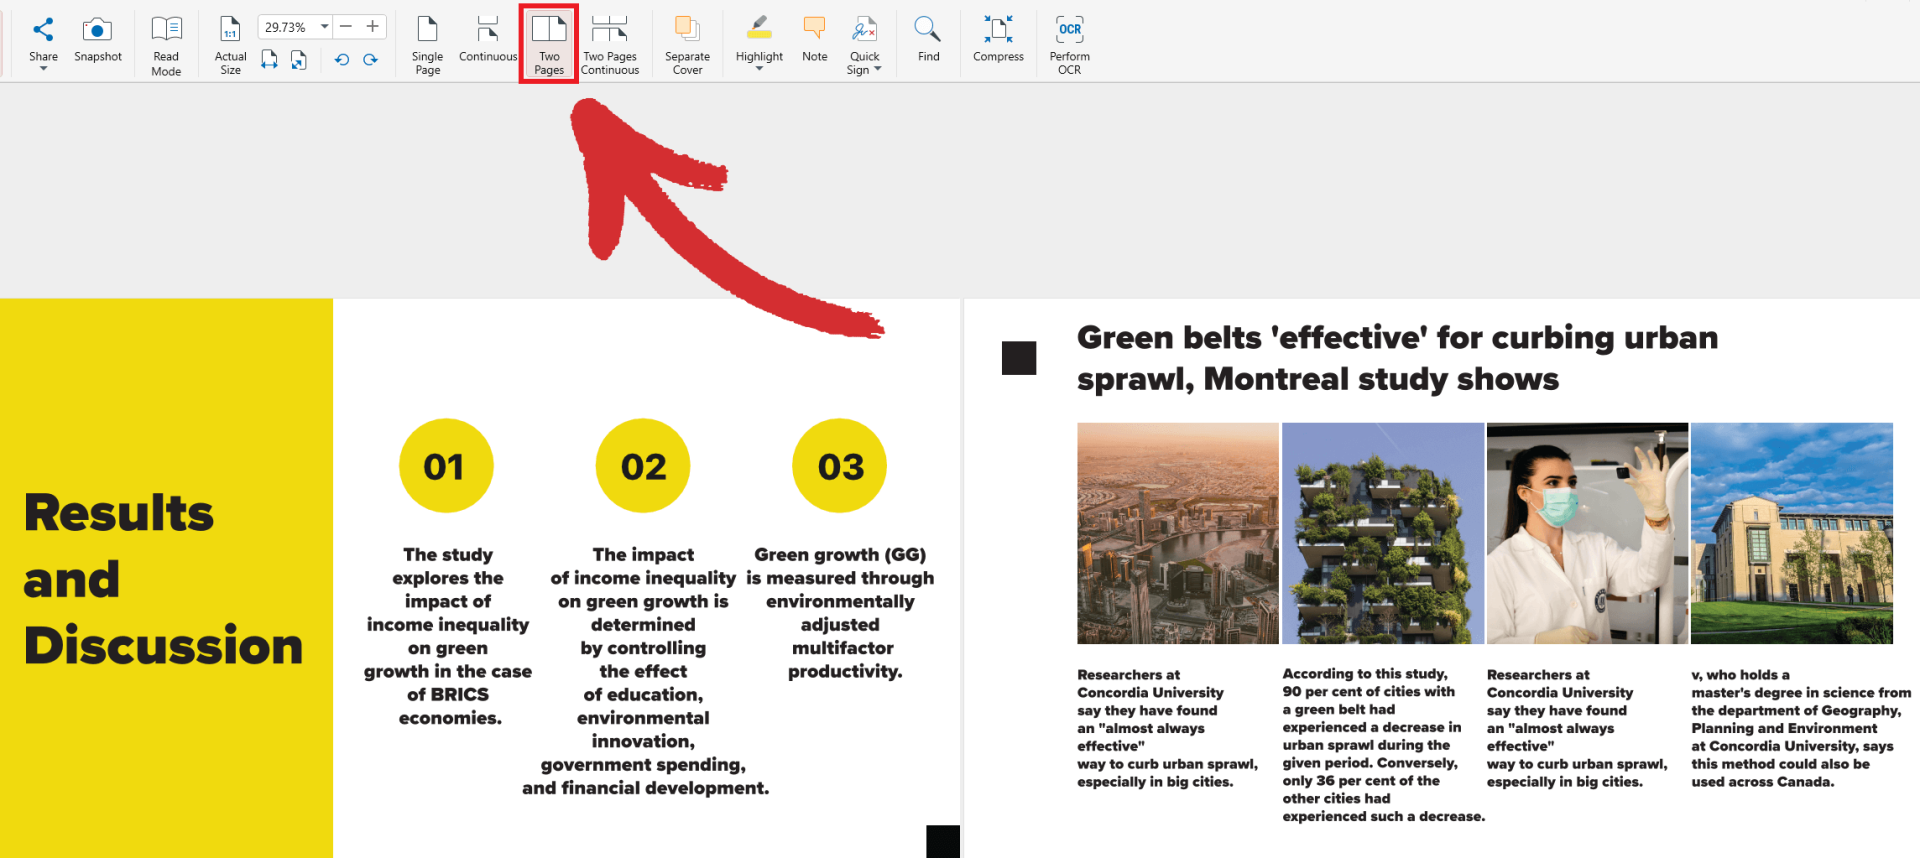 PDF Extra: activating two-page view mode